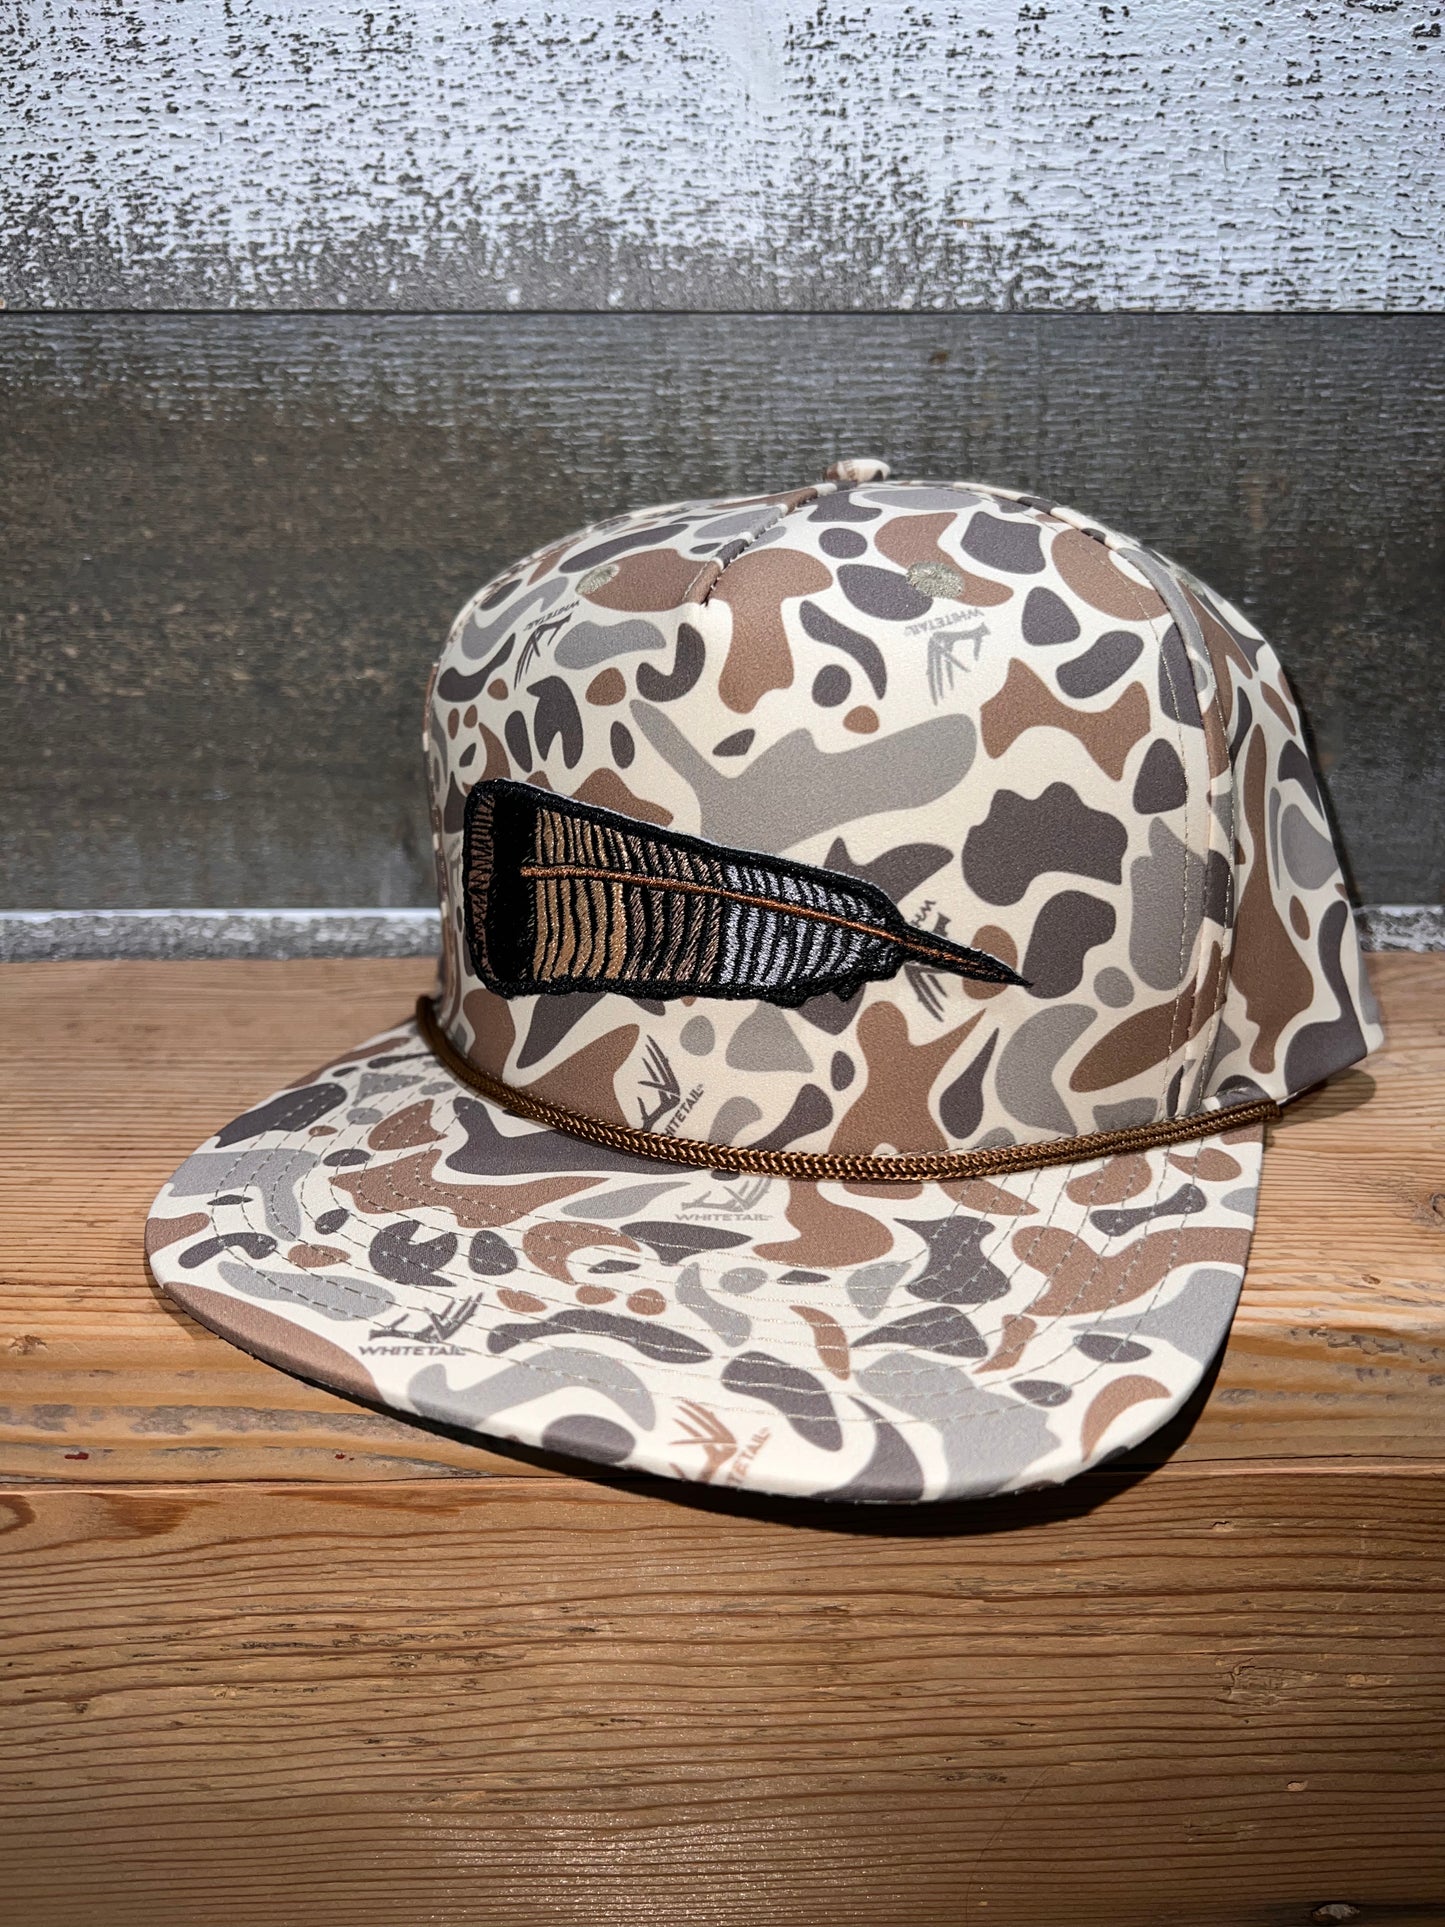 Whitetail Co. Fallen Feather Old Camo Trucker